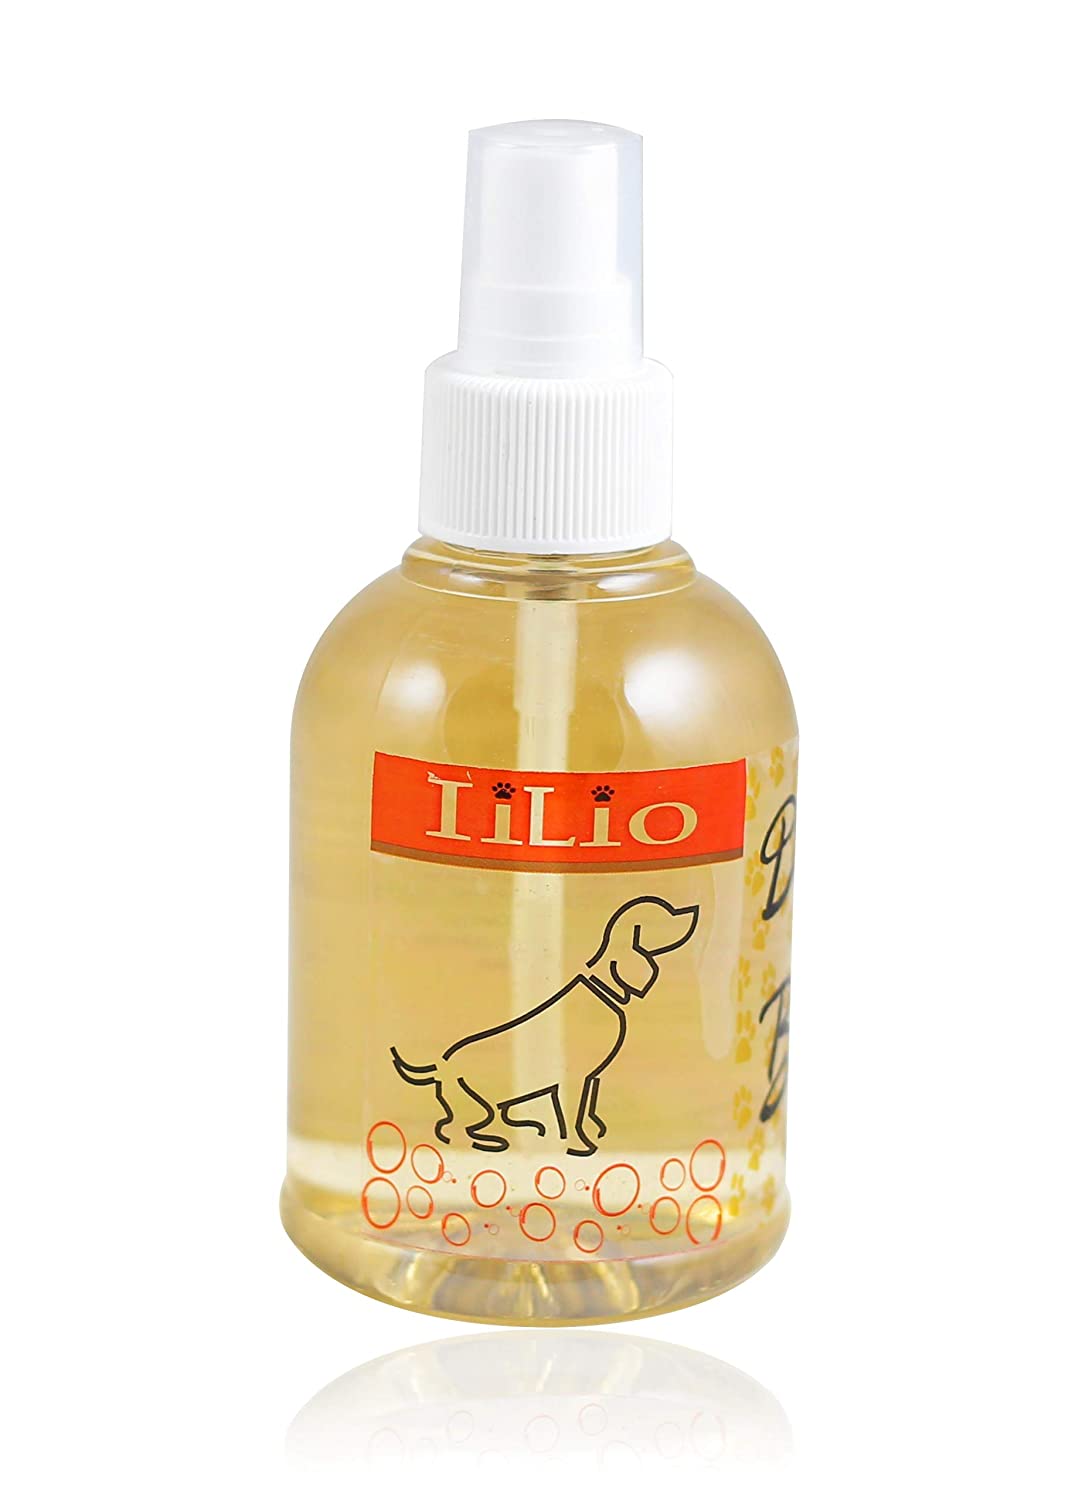 IiLio Natural Waterless Dry Bath for Dog with Long Lasting Fragnance